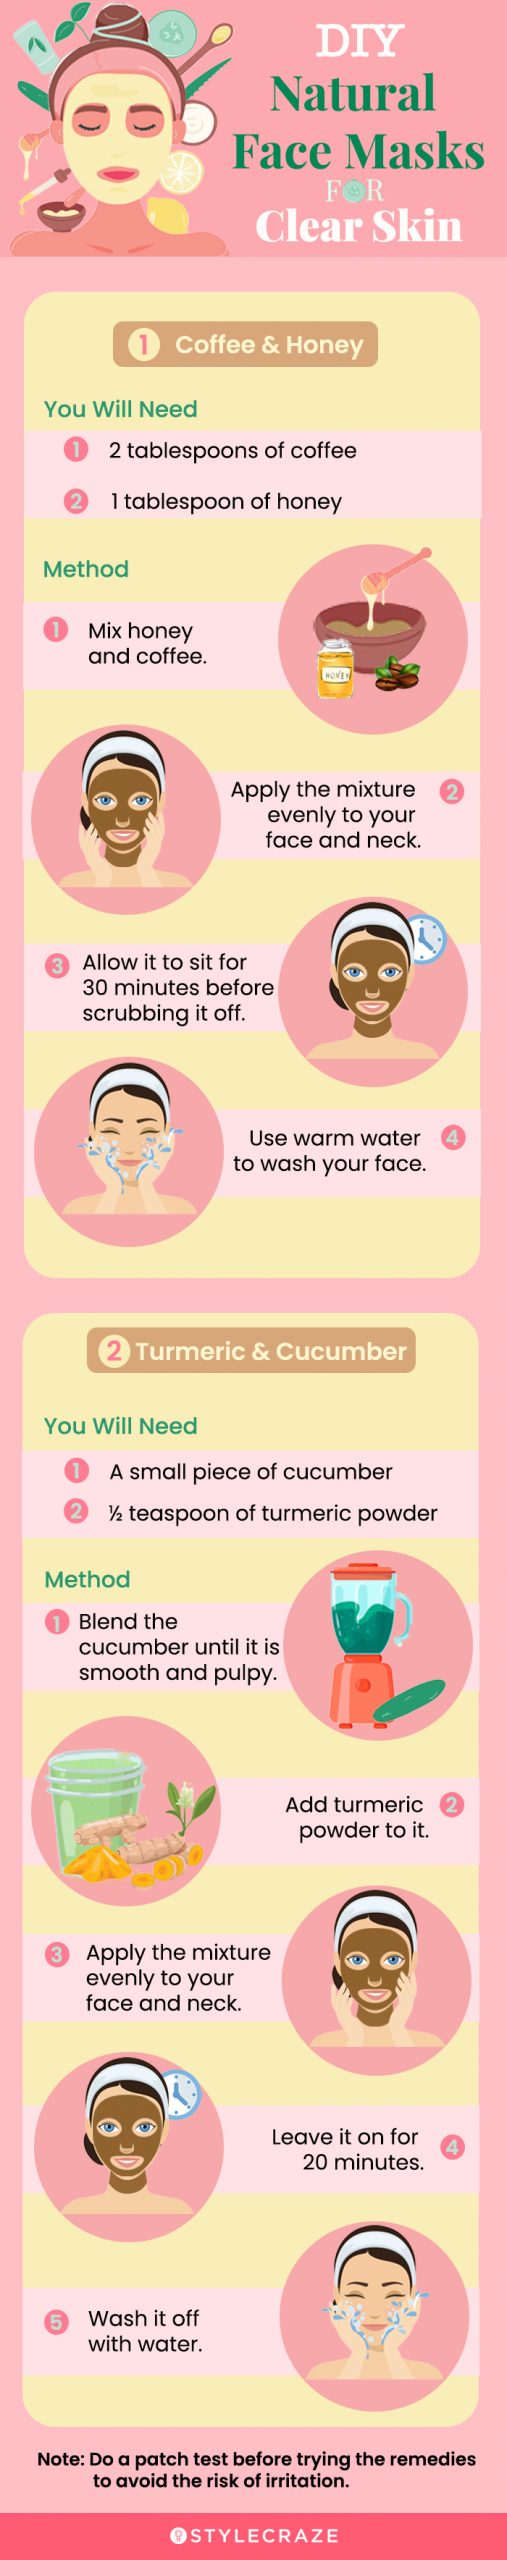 diy natural face mask for clear skin [infographic]